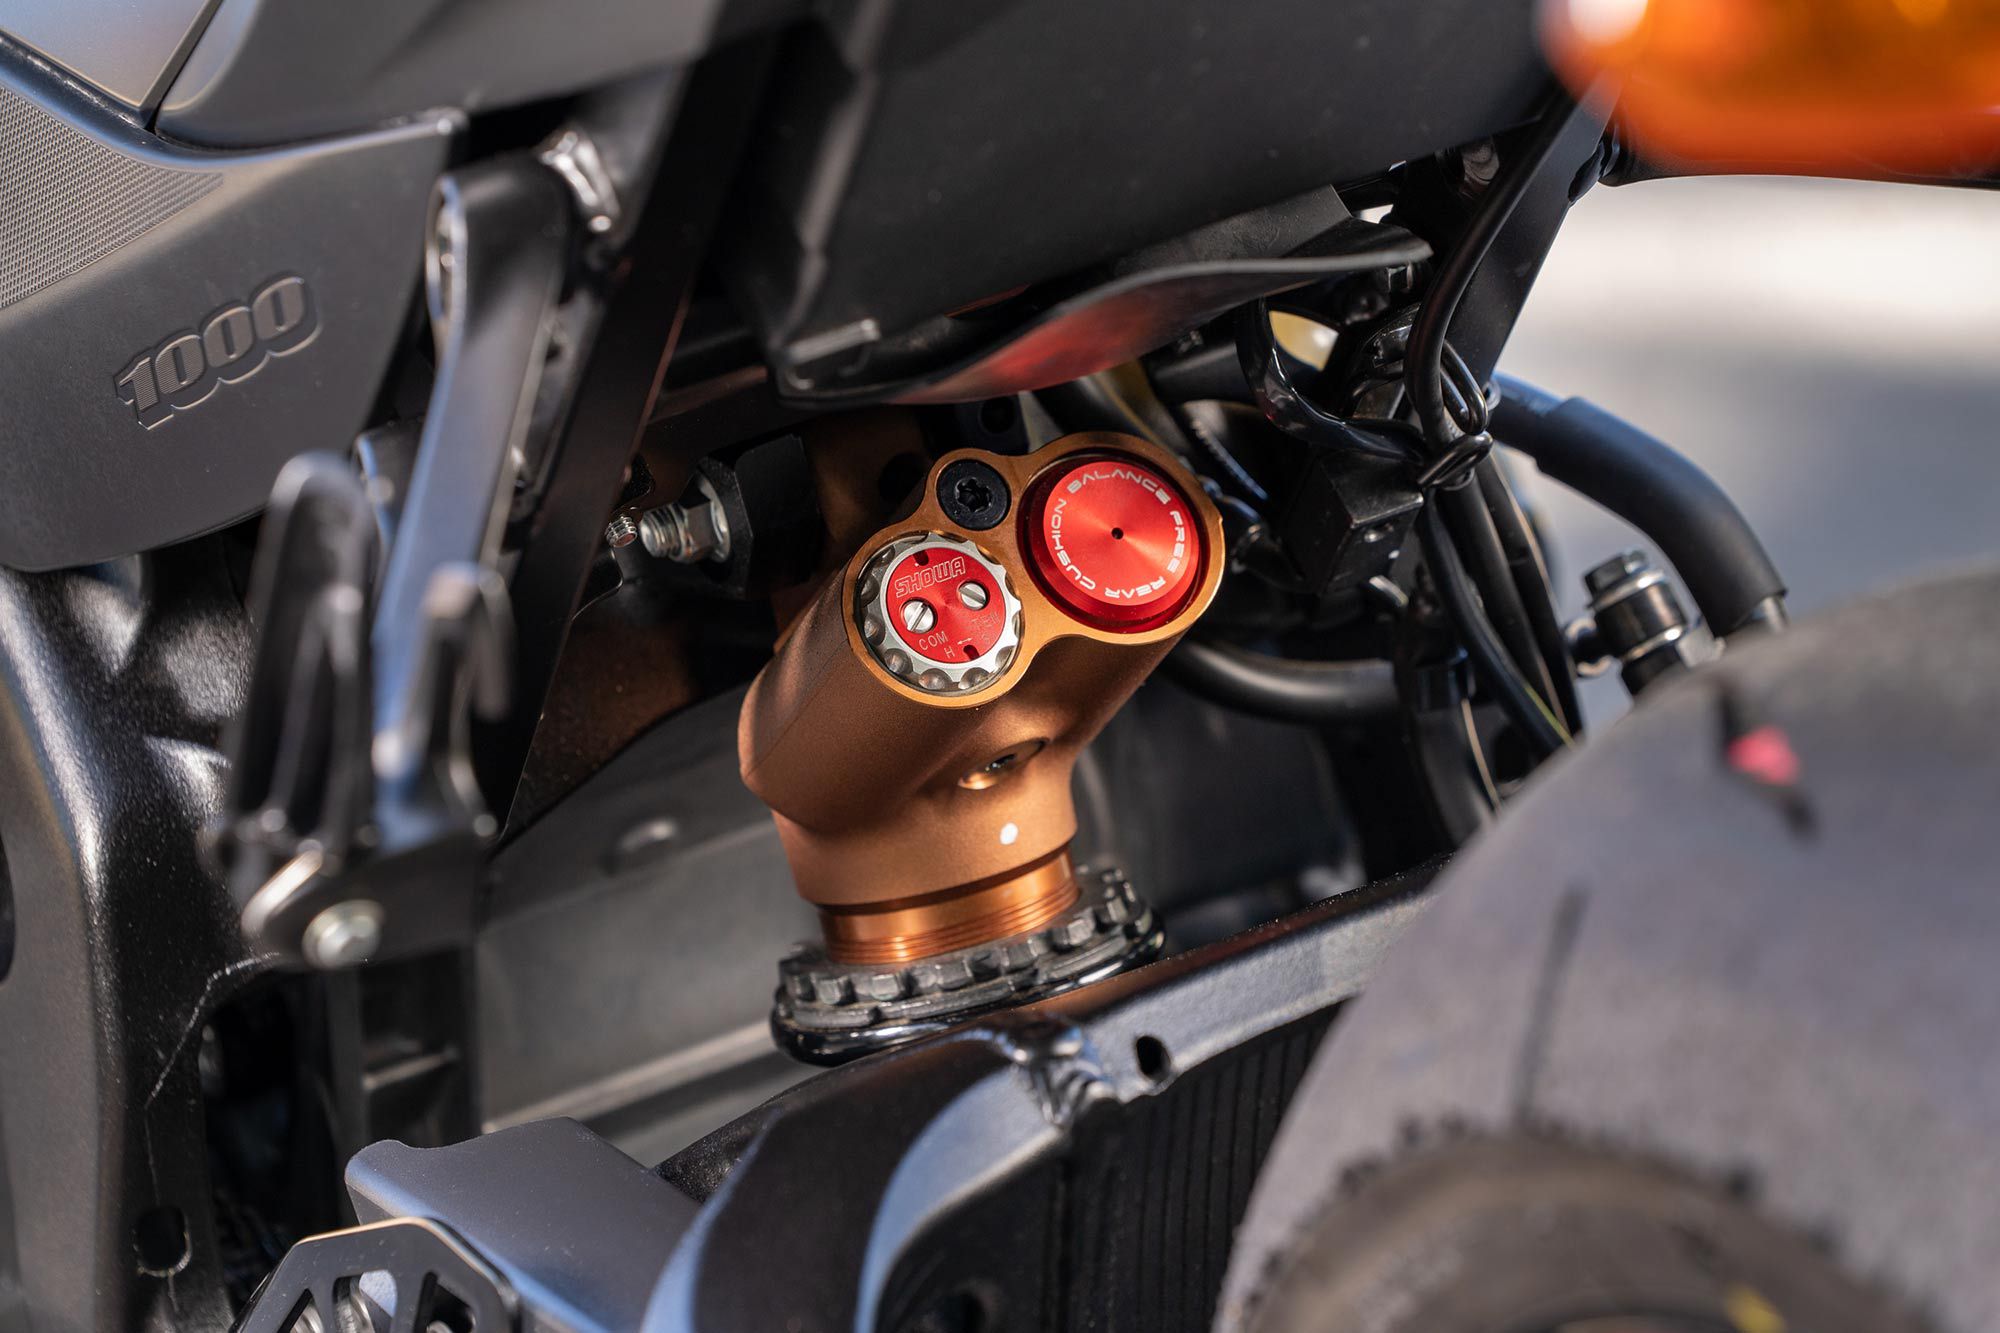 Rear suspension duties are handled by Showa’s Balance Free Rear Cushion Lite shock. It’s a weird name, but it performs well both on the street and track.